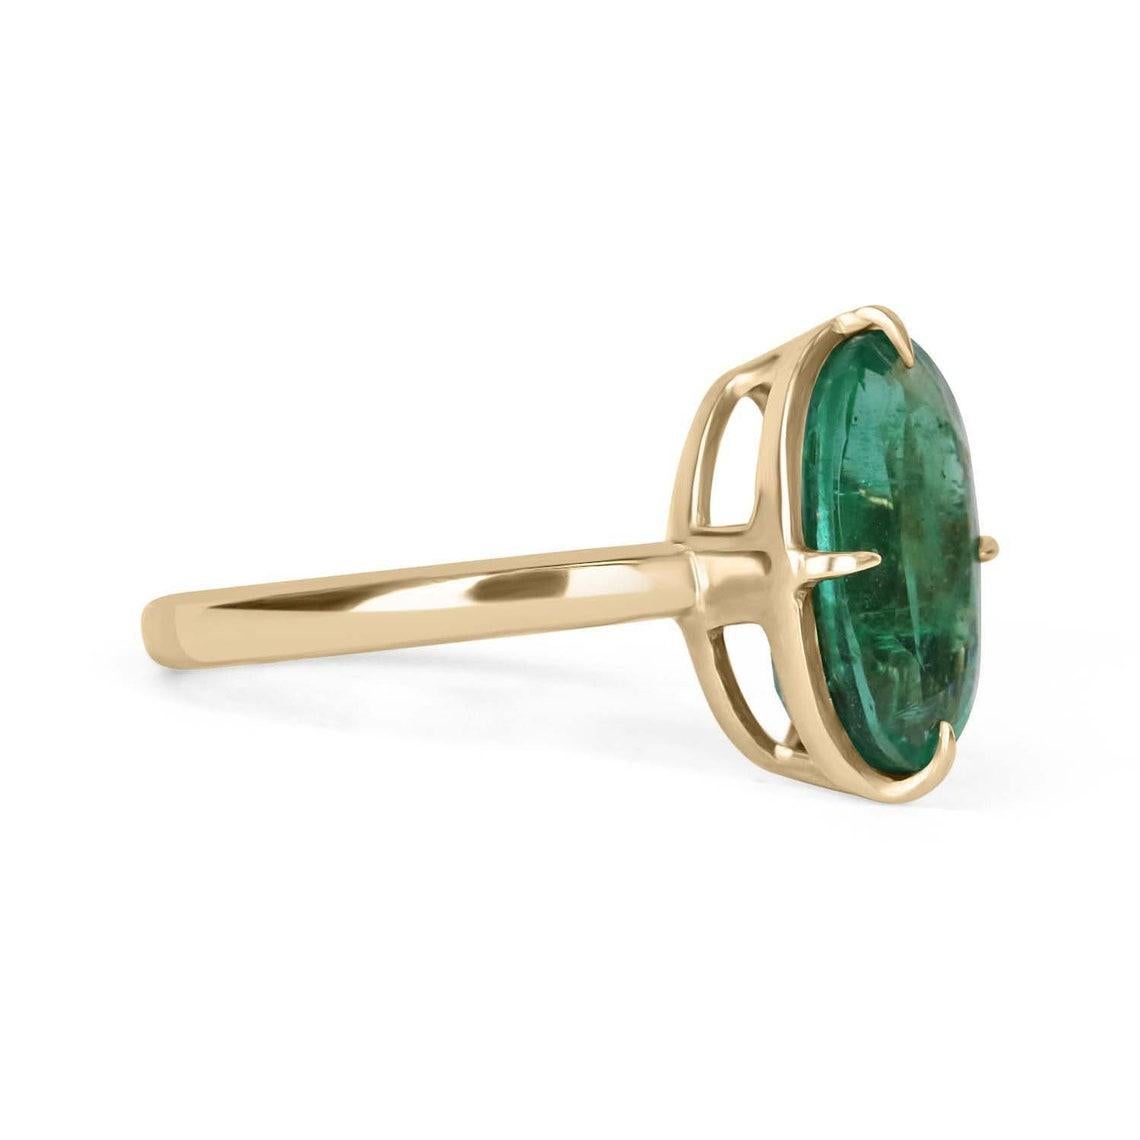 Displayed is a custom emerald solitaire oval-cut engagement/right-hand ring in 14K yellow gold. This gorgeous solitaire ring carries a 3.36-carat emerald in a prong setting. The emerald has very good clarity with minor flaws that are normal in all